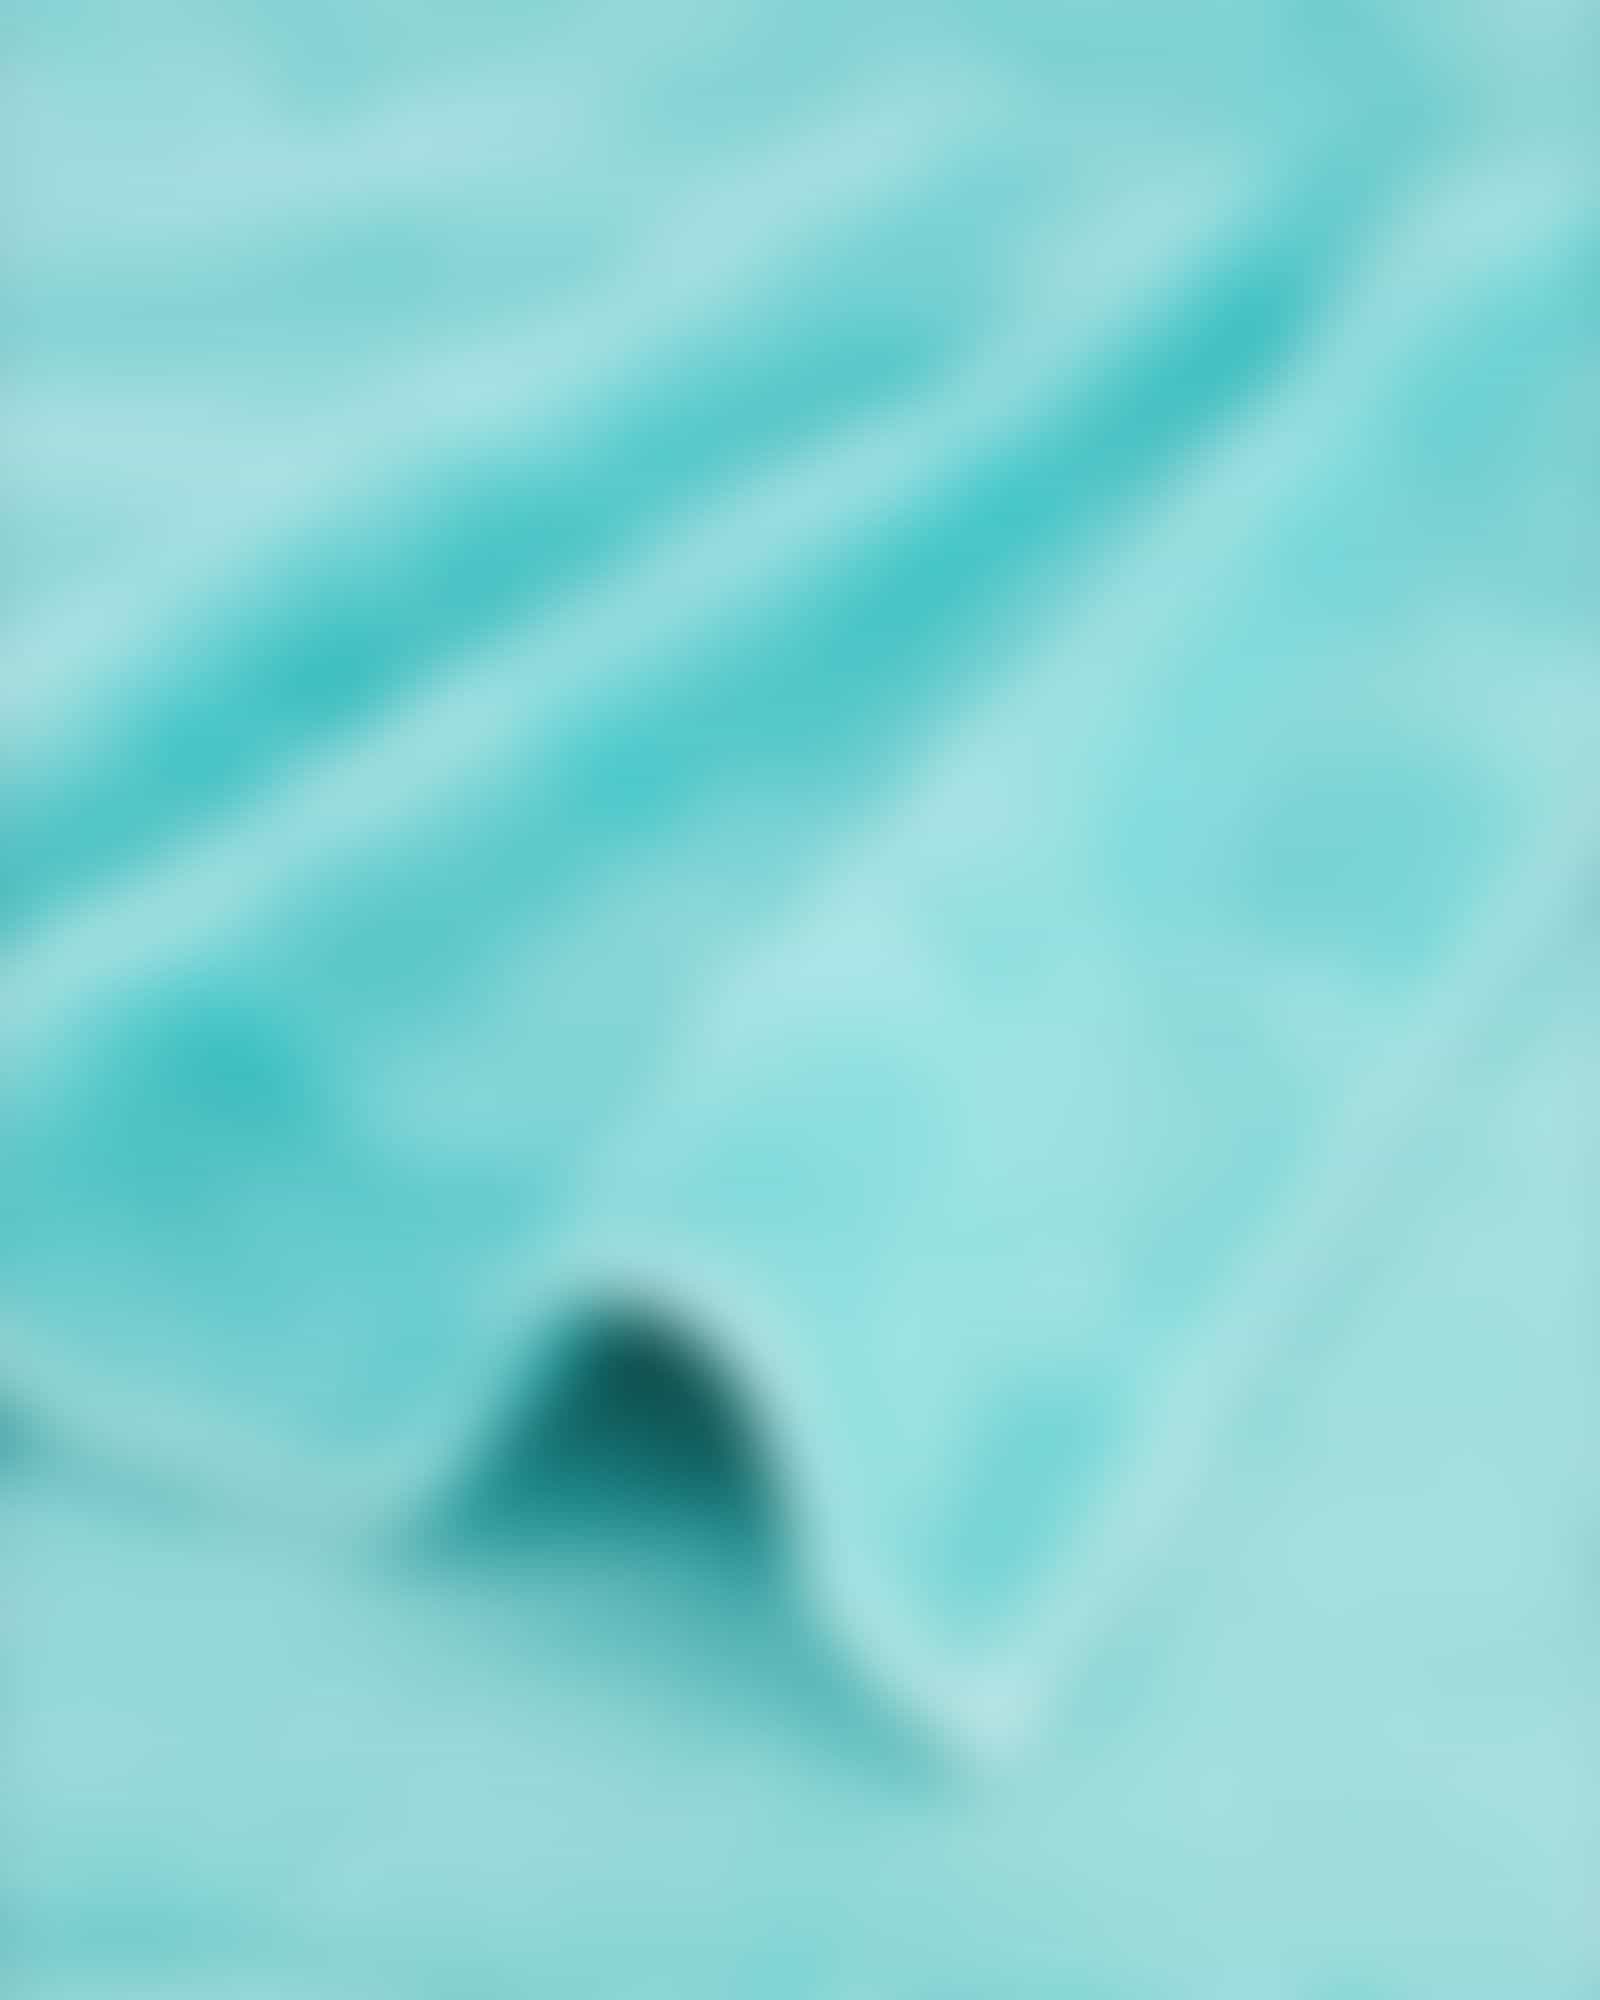 Cawö - Noblesse2 1002 - Farbe: 404 - mint - Handtuch 50x100 cm